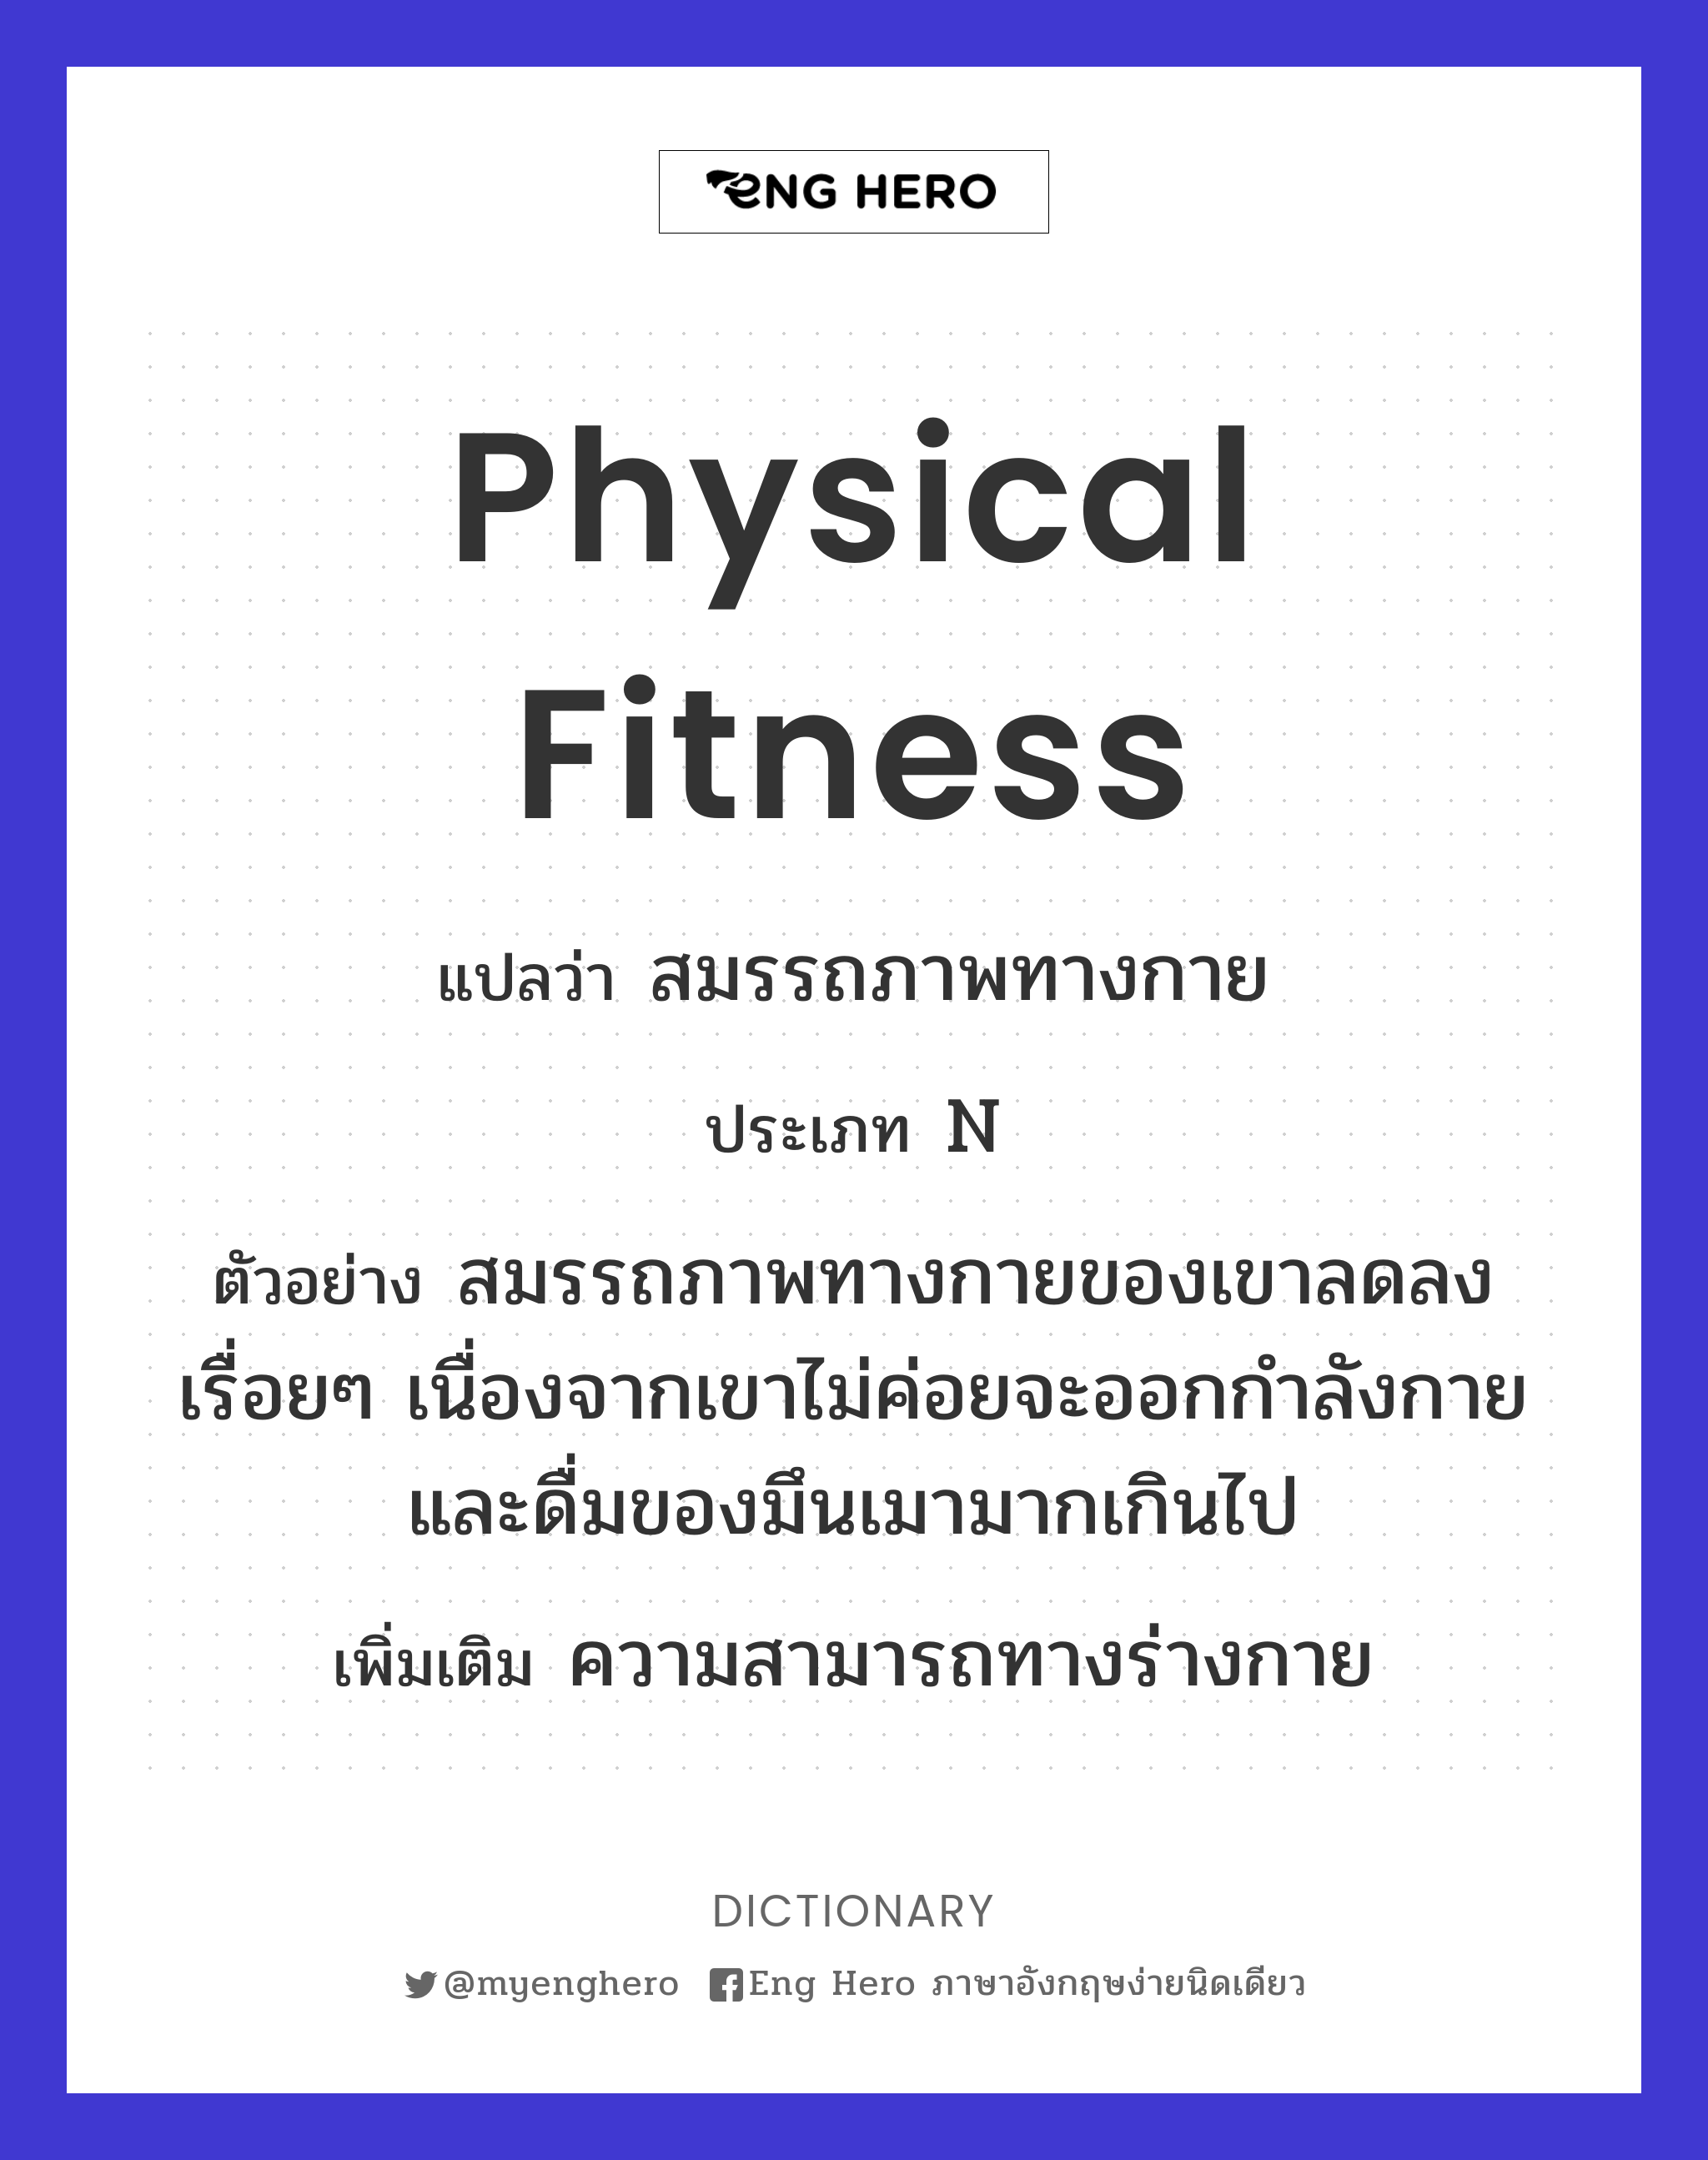 physical fitness